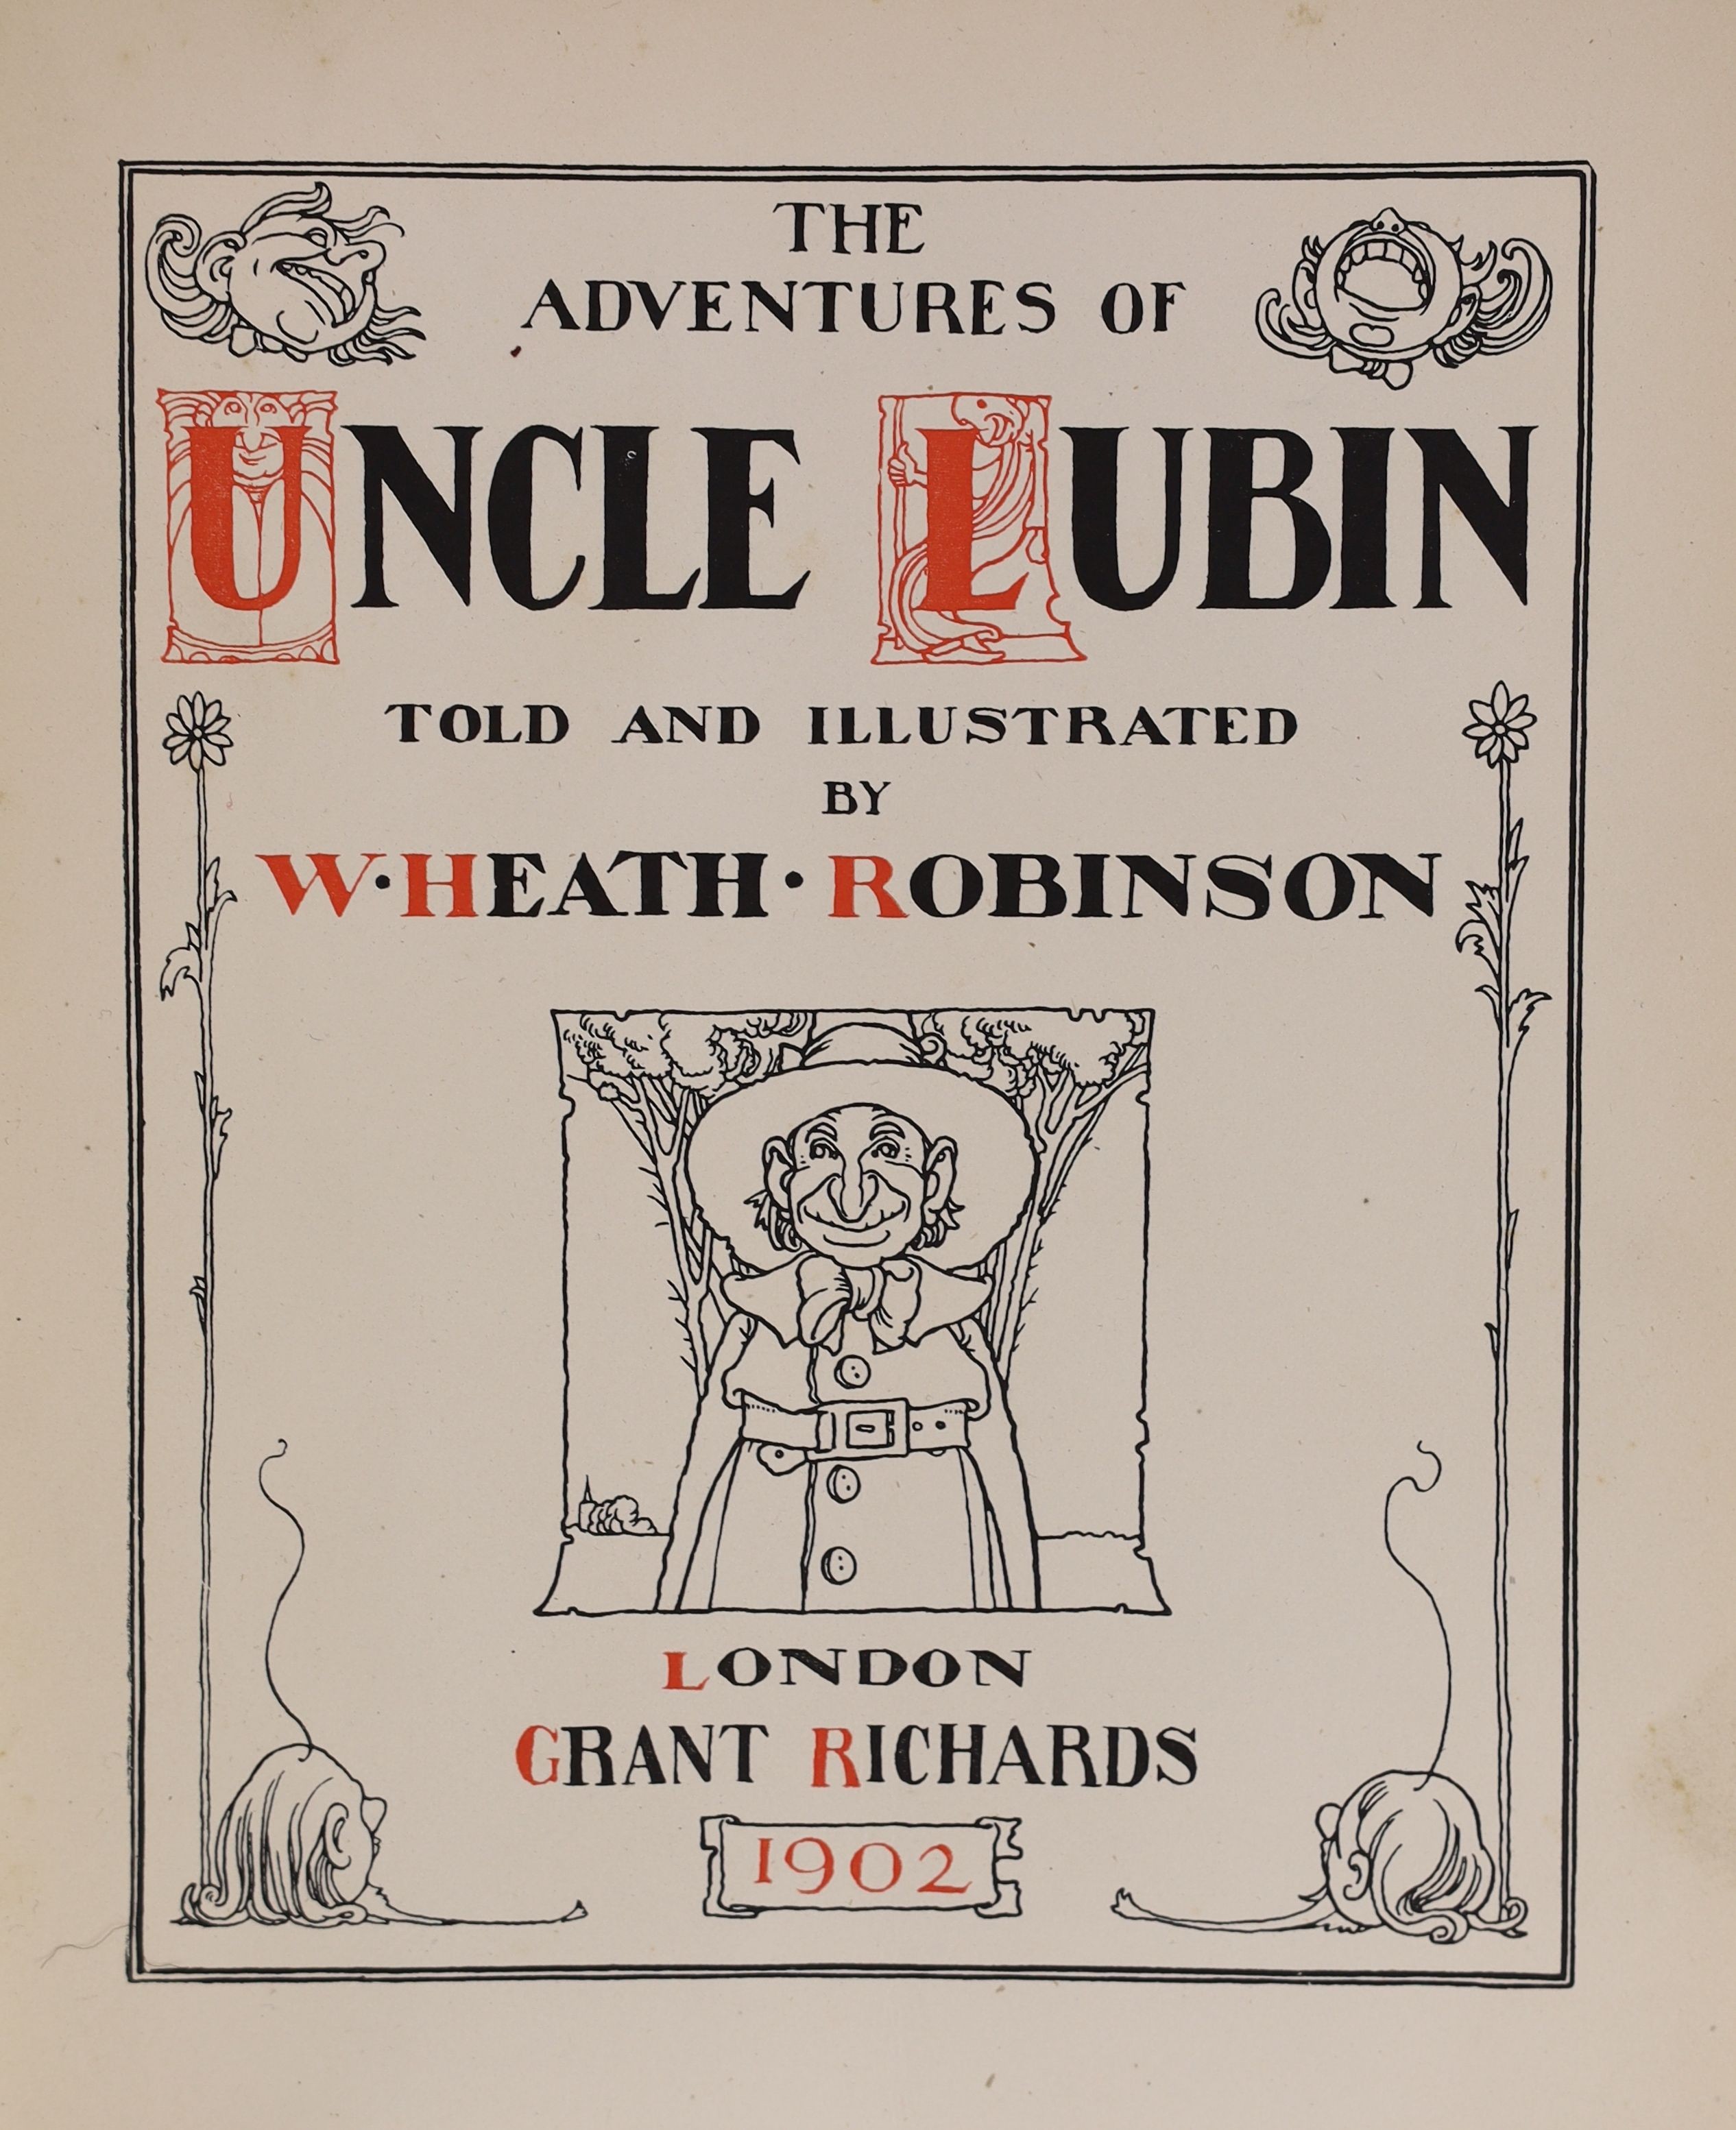 Robinson, W. Heath - The Adventures of Uncle Lubin, 1st edition, 4to, original pictorial cloth, with frontis and 40 plates, Grant Richards, London, 1902